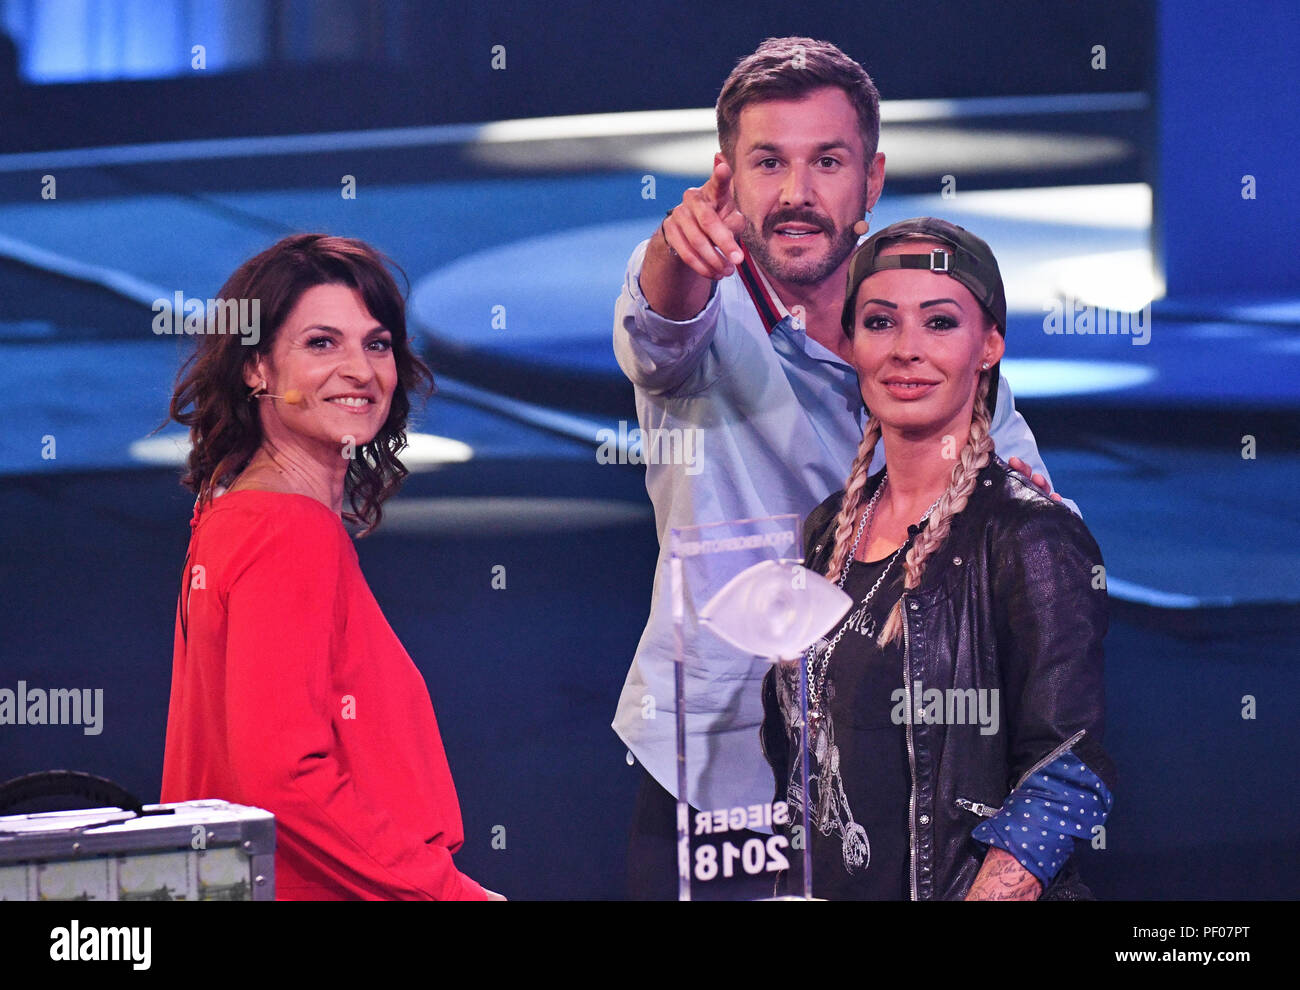 Cologne, Germany. 17th Aug, 2018. Cora Schumacher (r) is on stage alongside the presenters Jochen Schropp and Marlene Lufen at the opening show of the new season of the Sat.1 reality show 'Celebrity Big Brother'. Credit: Henning Kaiser/dpa/Alamy Live News Stock Photo